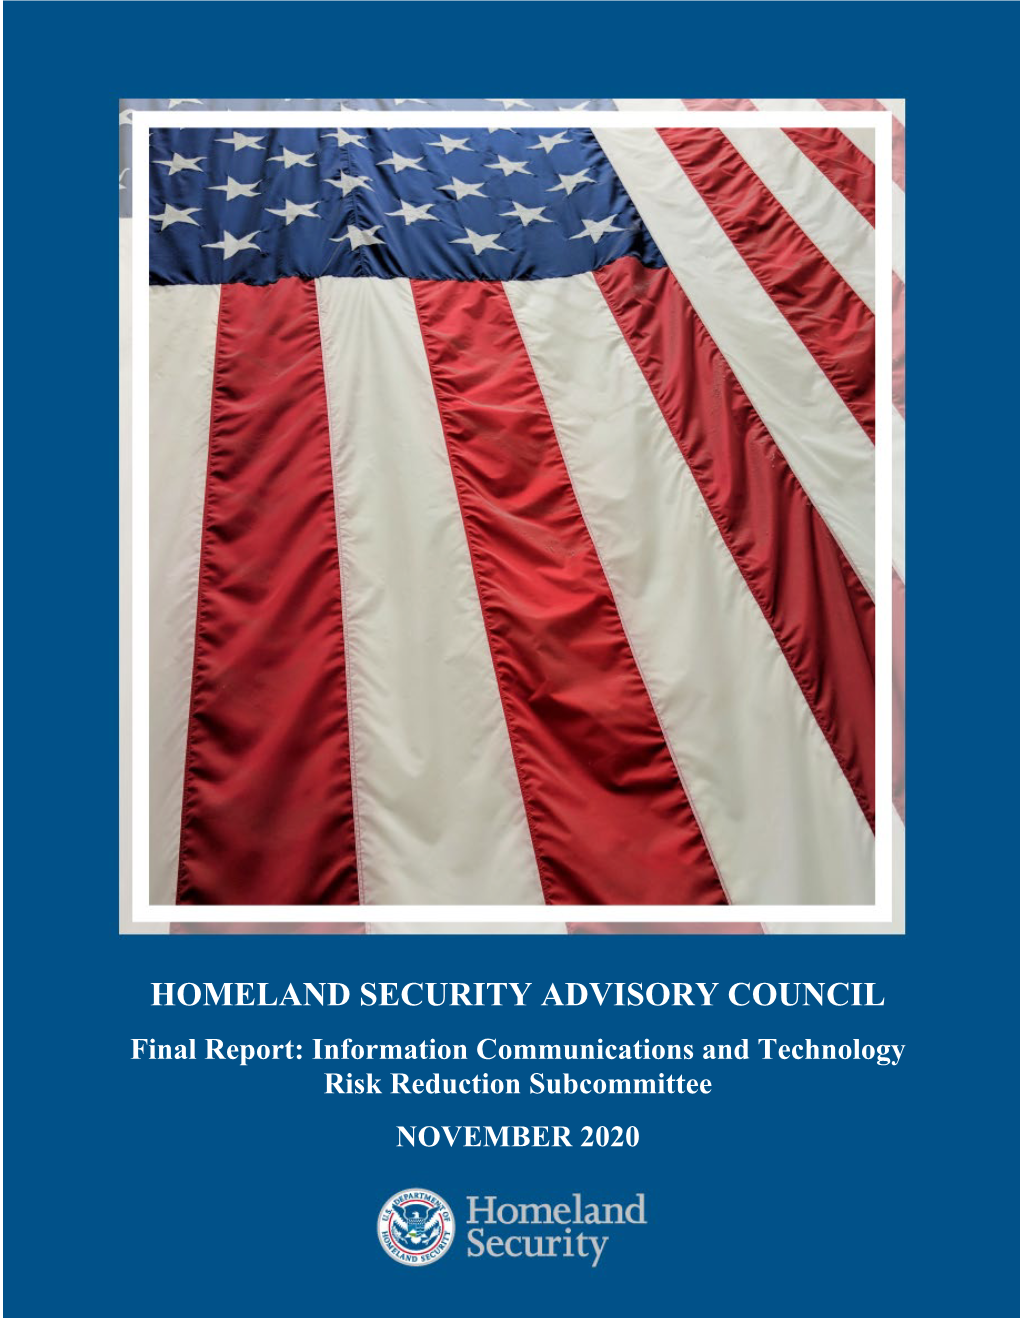 ICT Risk Reduction Subcommittee Report